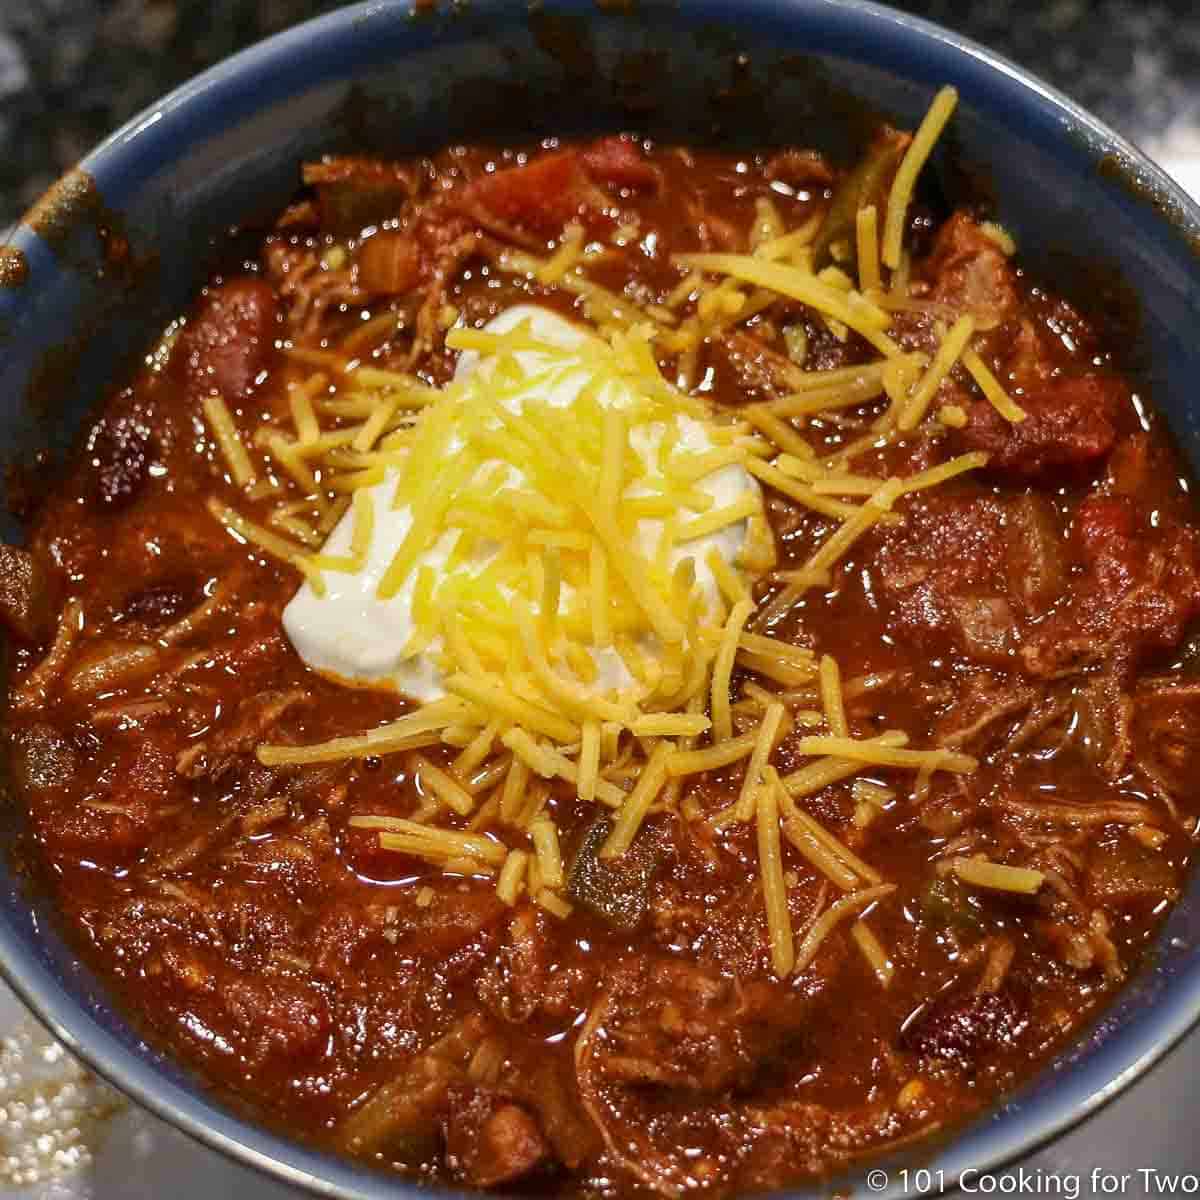 Chuck roast chili in a blue bowl.